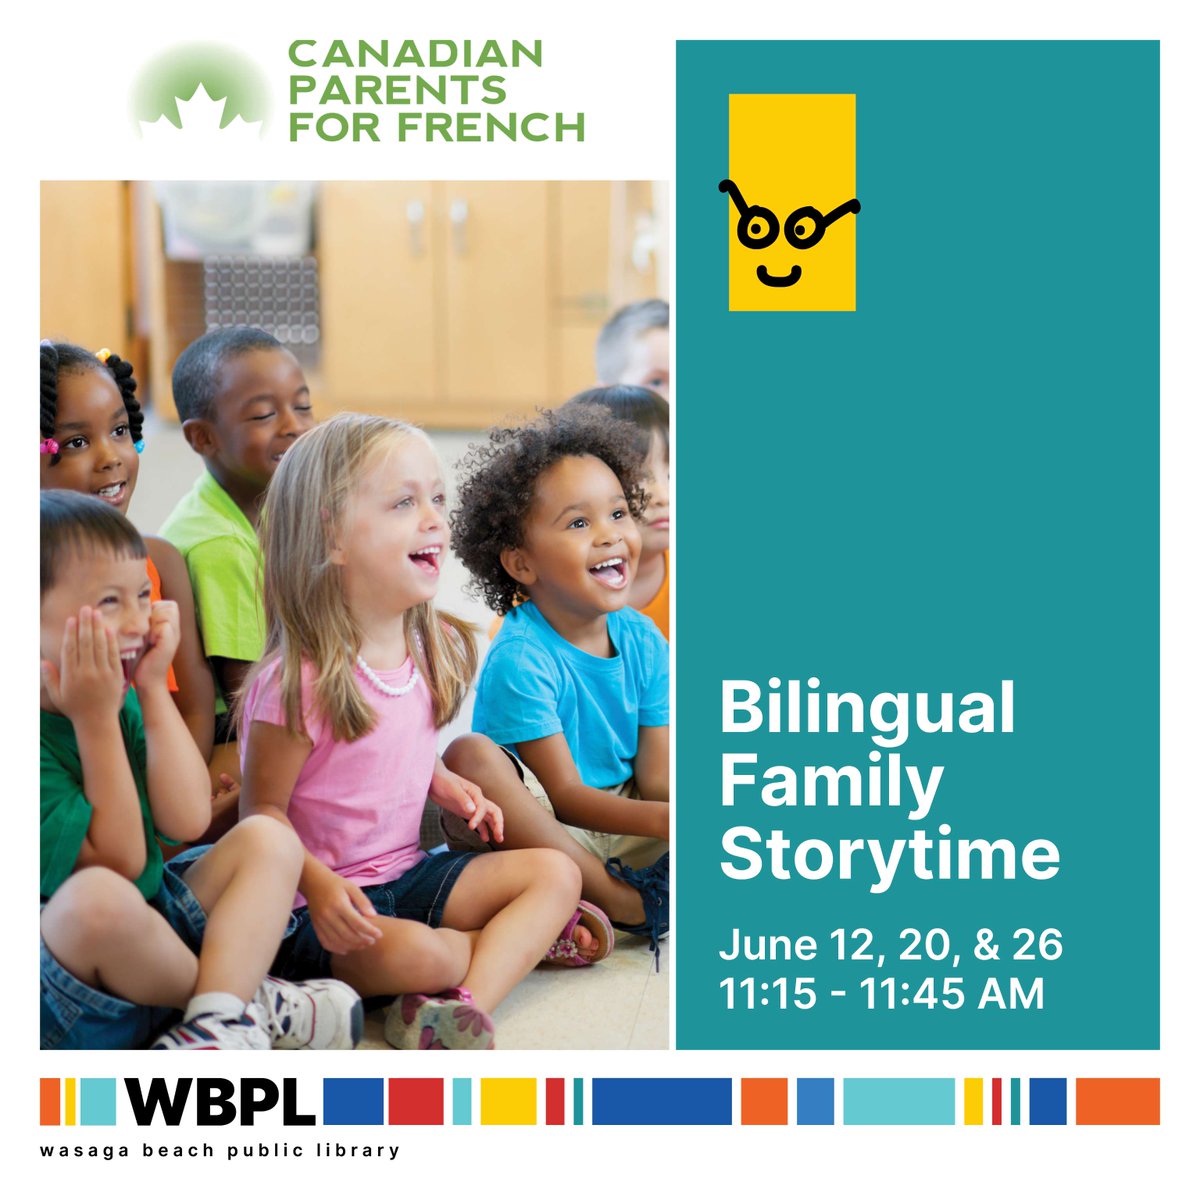 Join us for French Storytime with Canadian Parents for French. Explore French books, songs, and rhymes to enhance language skills. Suitable for ages 0-6. Discover a new language with us! #Storytime #FrenchLearning #FindItHere #WasagaBeach

Register: eventbrite.ca/e/901652917147…